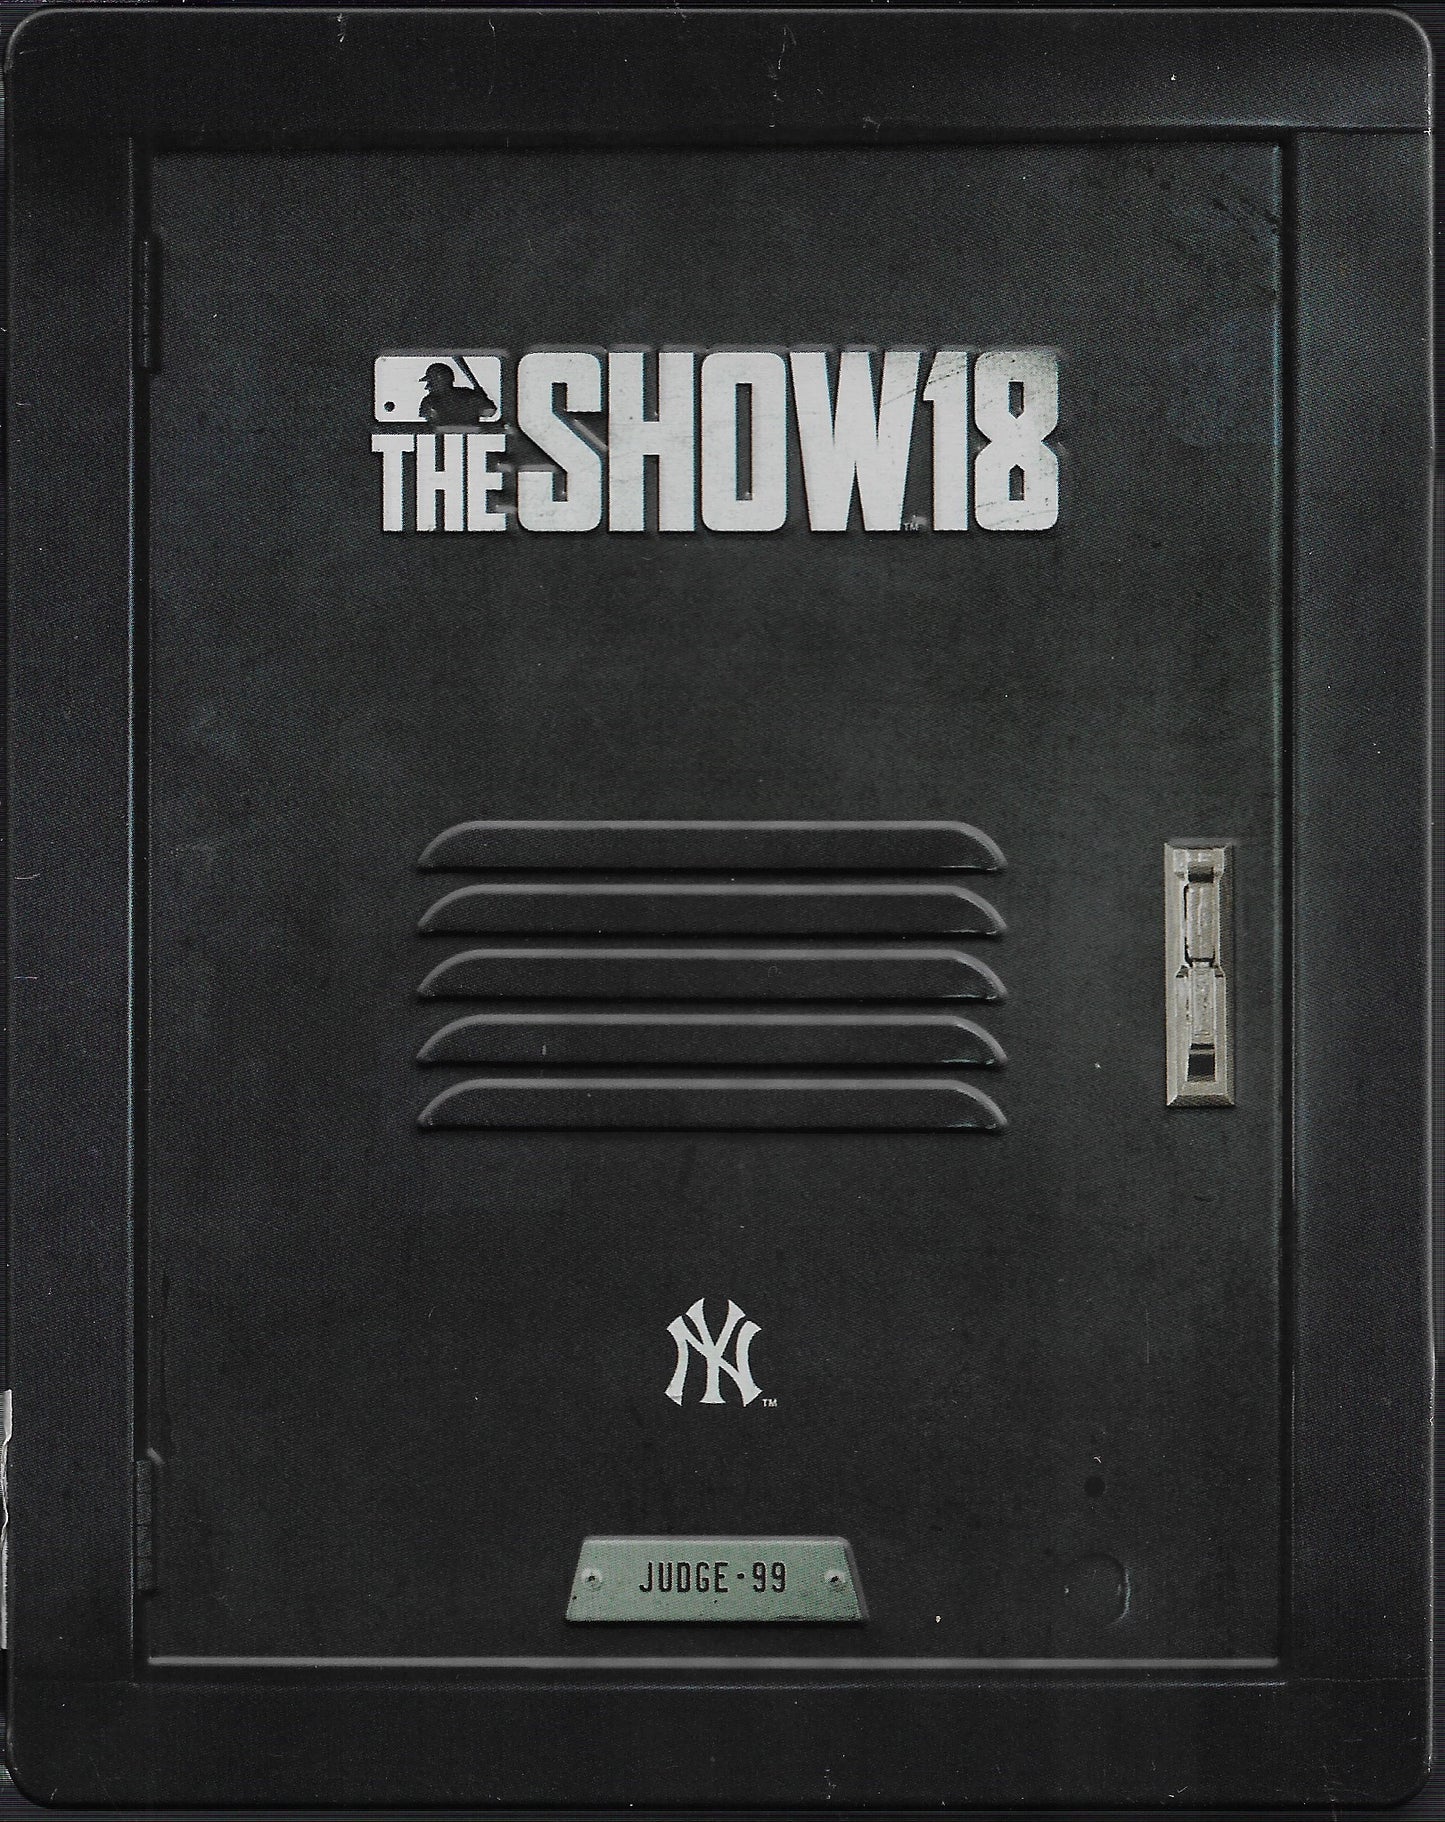 Ps4 The Show 18 Steelbook